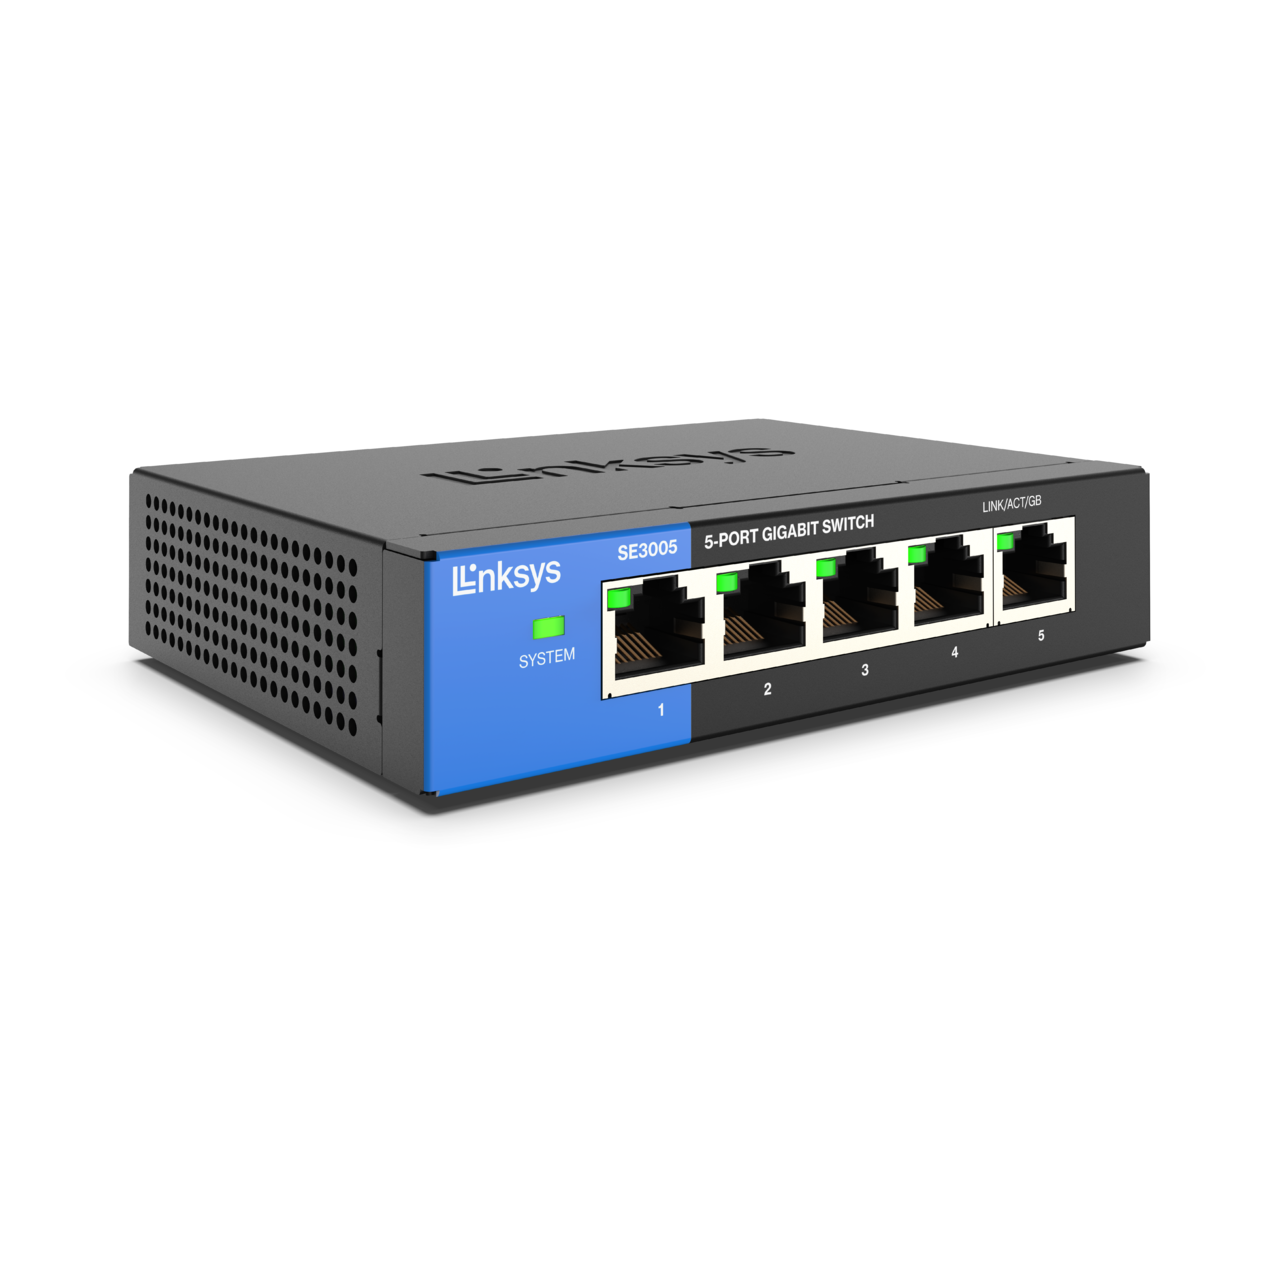 CyberData 2 Port PoE Gigabit Switch 2 Ports Gigabit Ethernet 101001000Base  T 2 Layer Supported Twisted Pair PoE Ports Desktop 2 Year Limited Warranty  - Office Depot